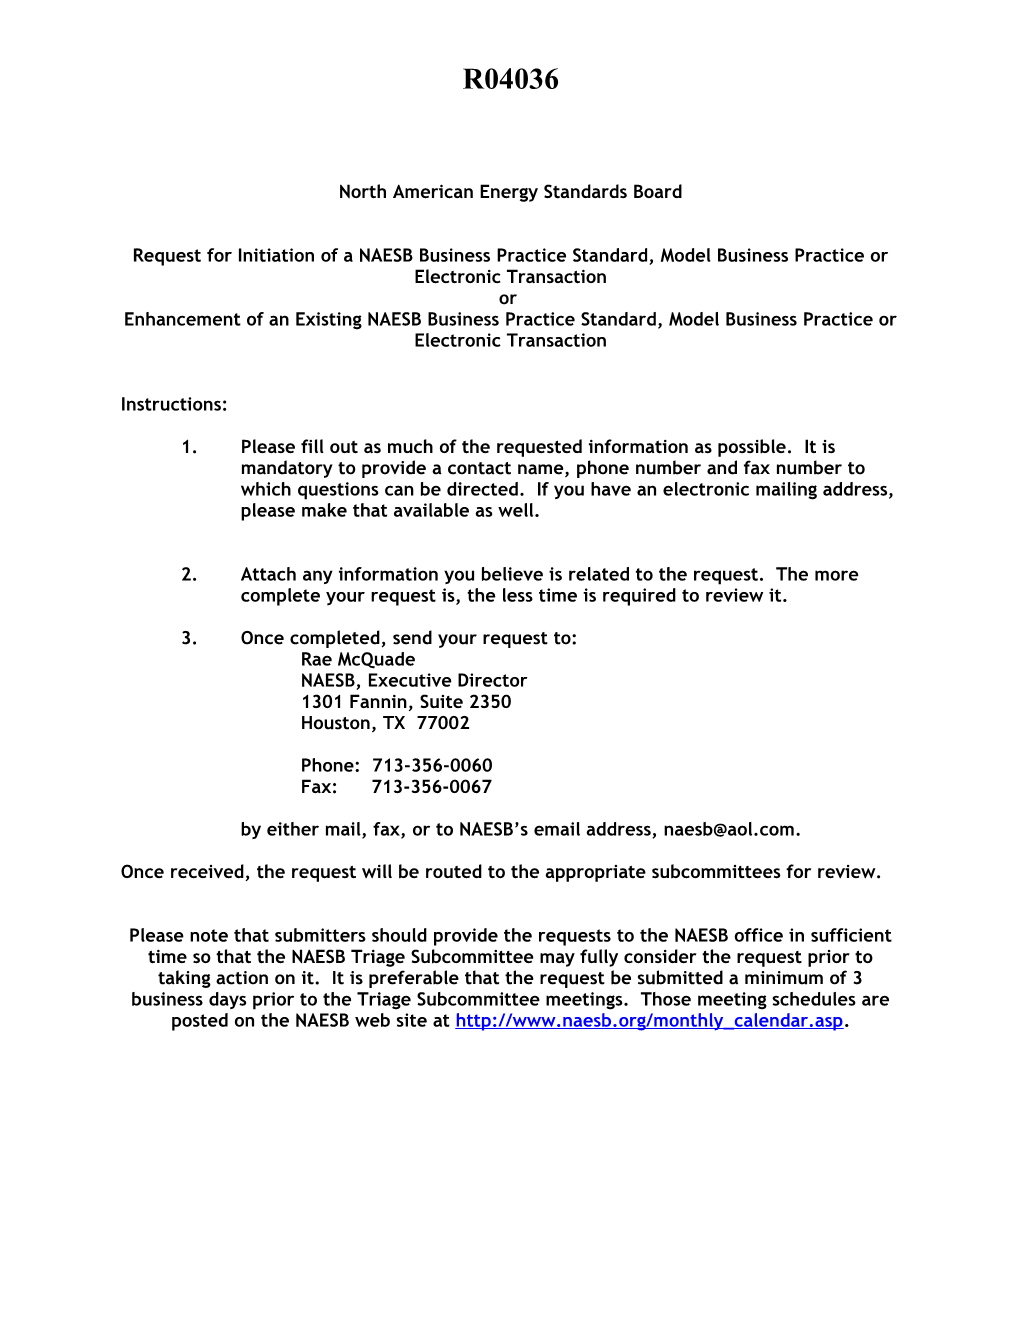 North American Energy Standards Board s22